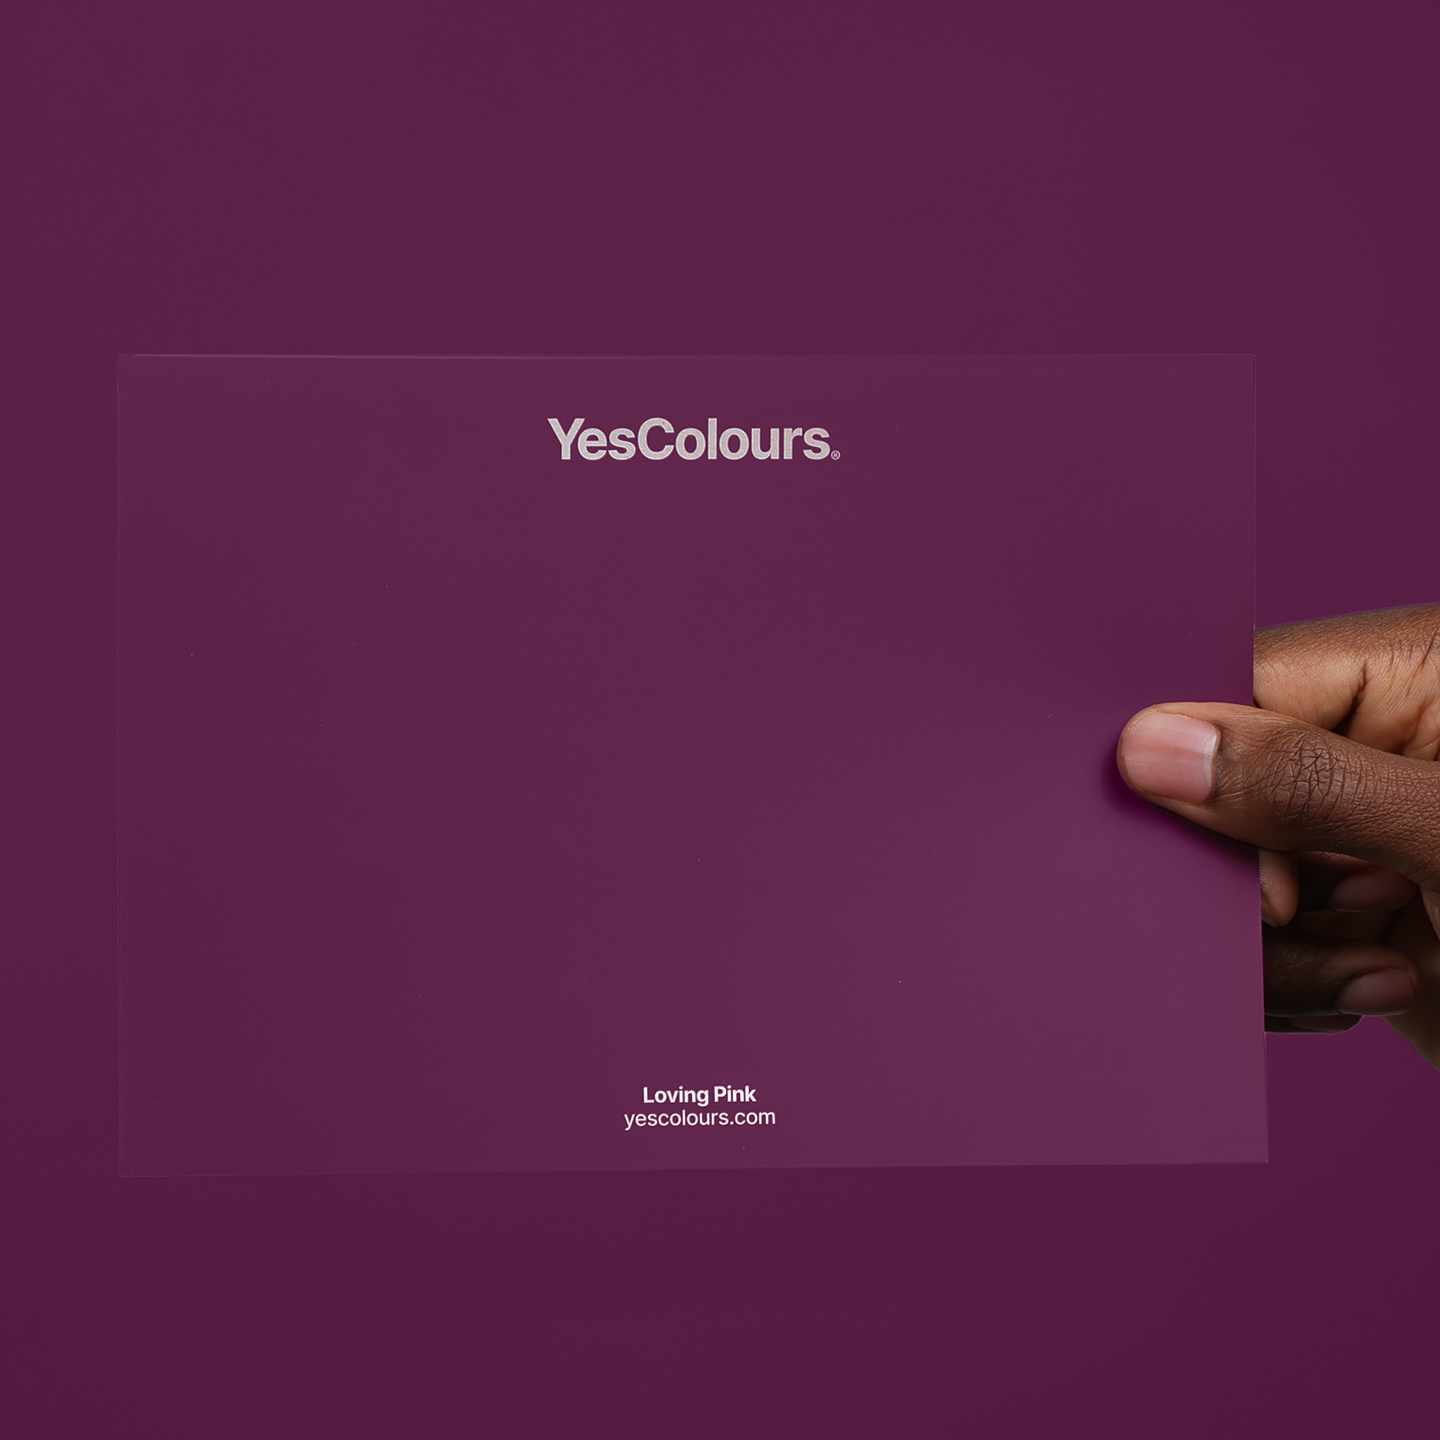 YesColours premium Loving Pink paint swatch